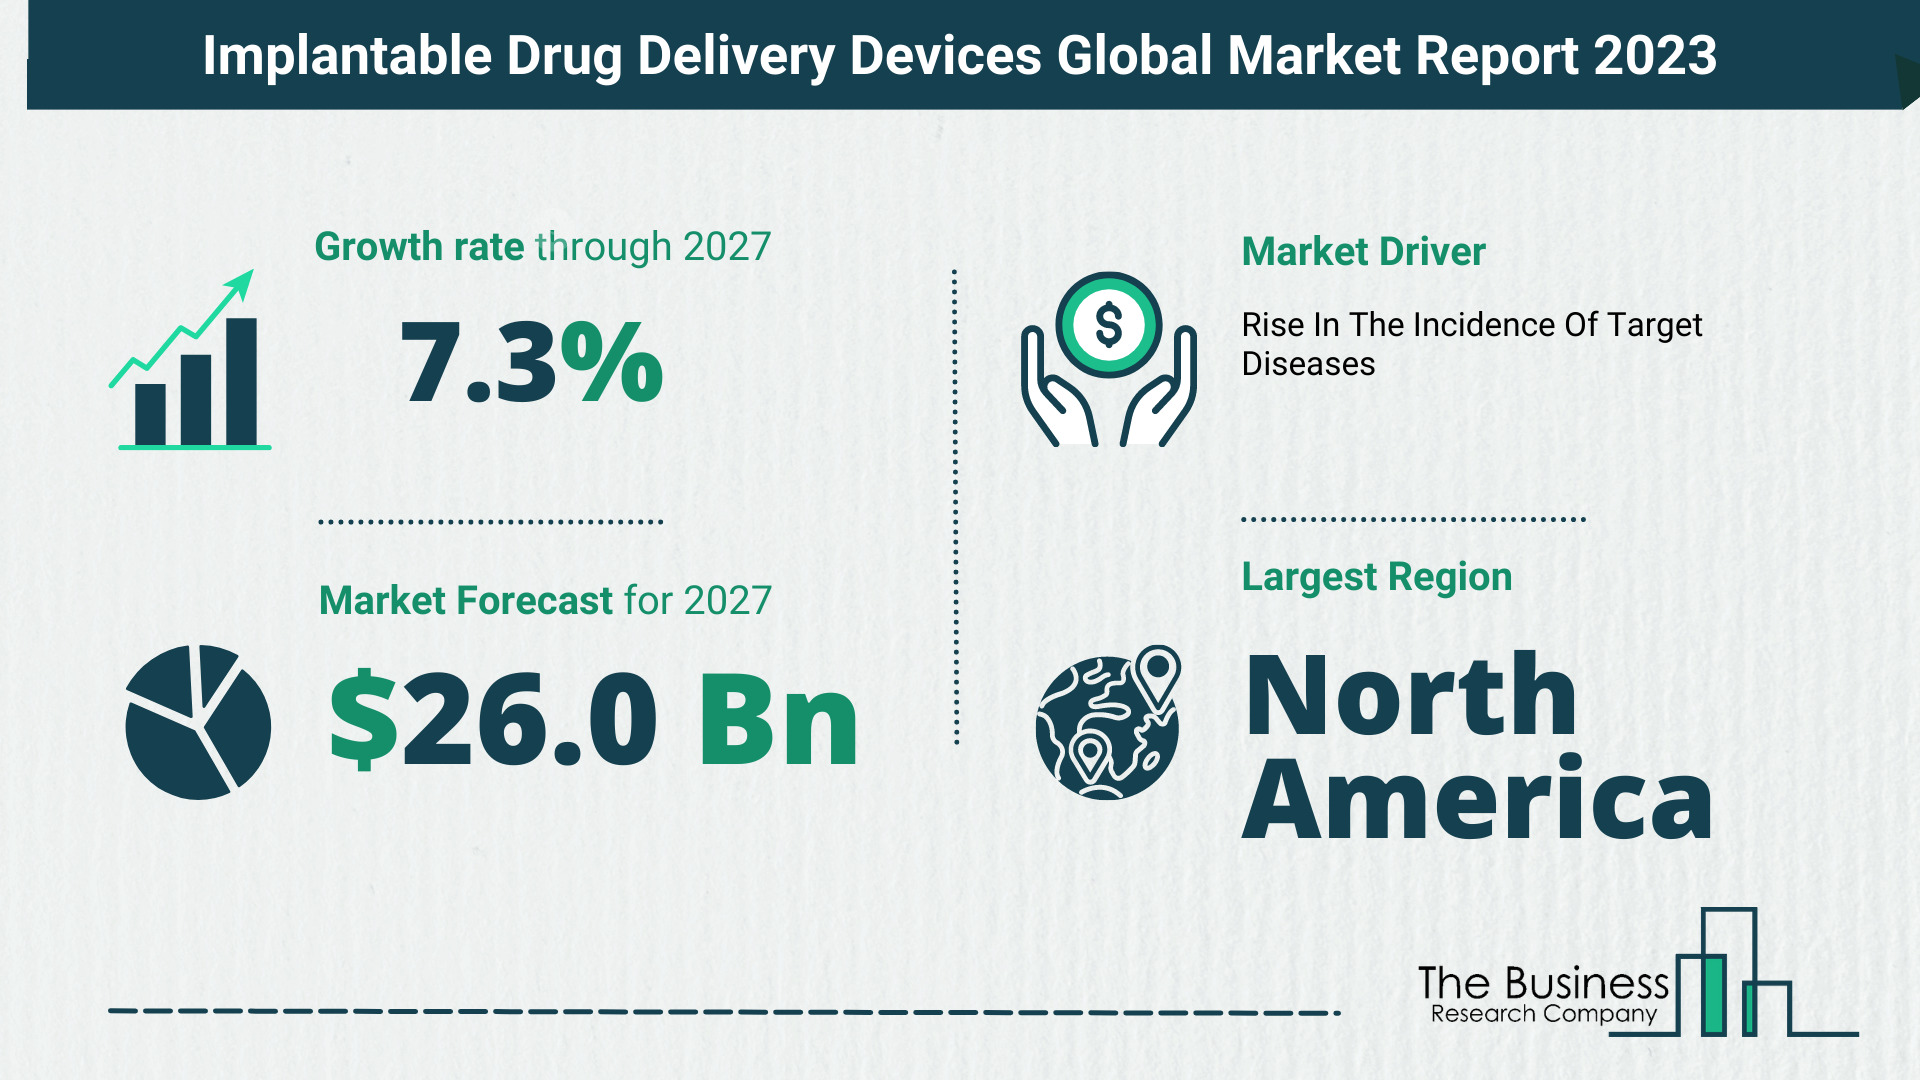 Implantable Drug Delivery Devices Market Overview: Market Size, Drivers And Trends